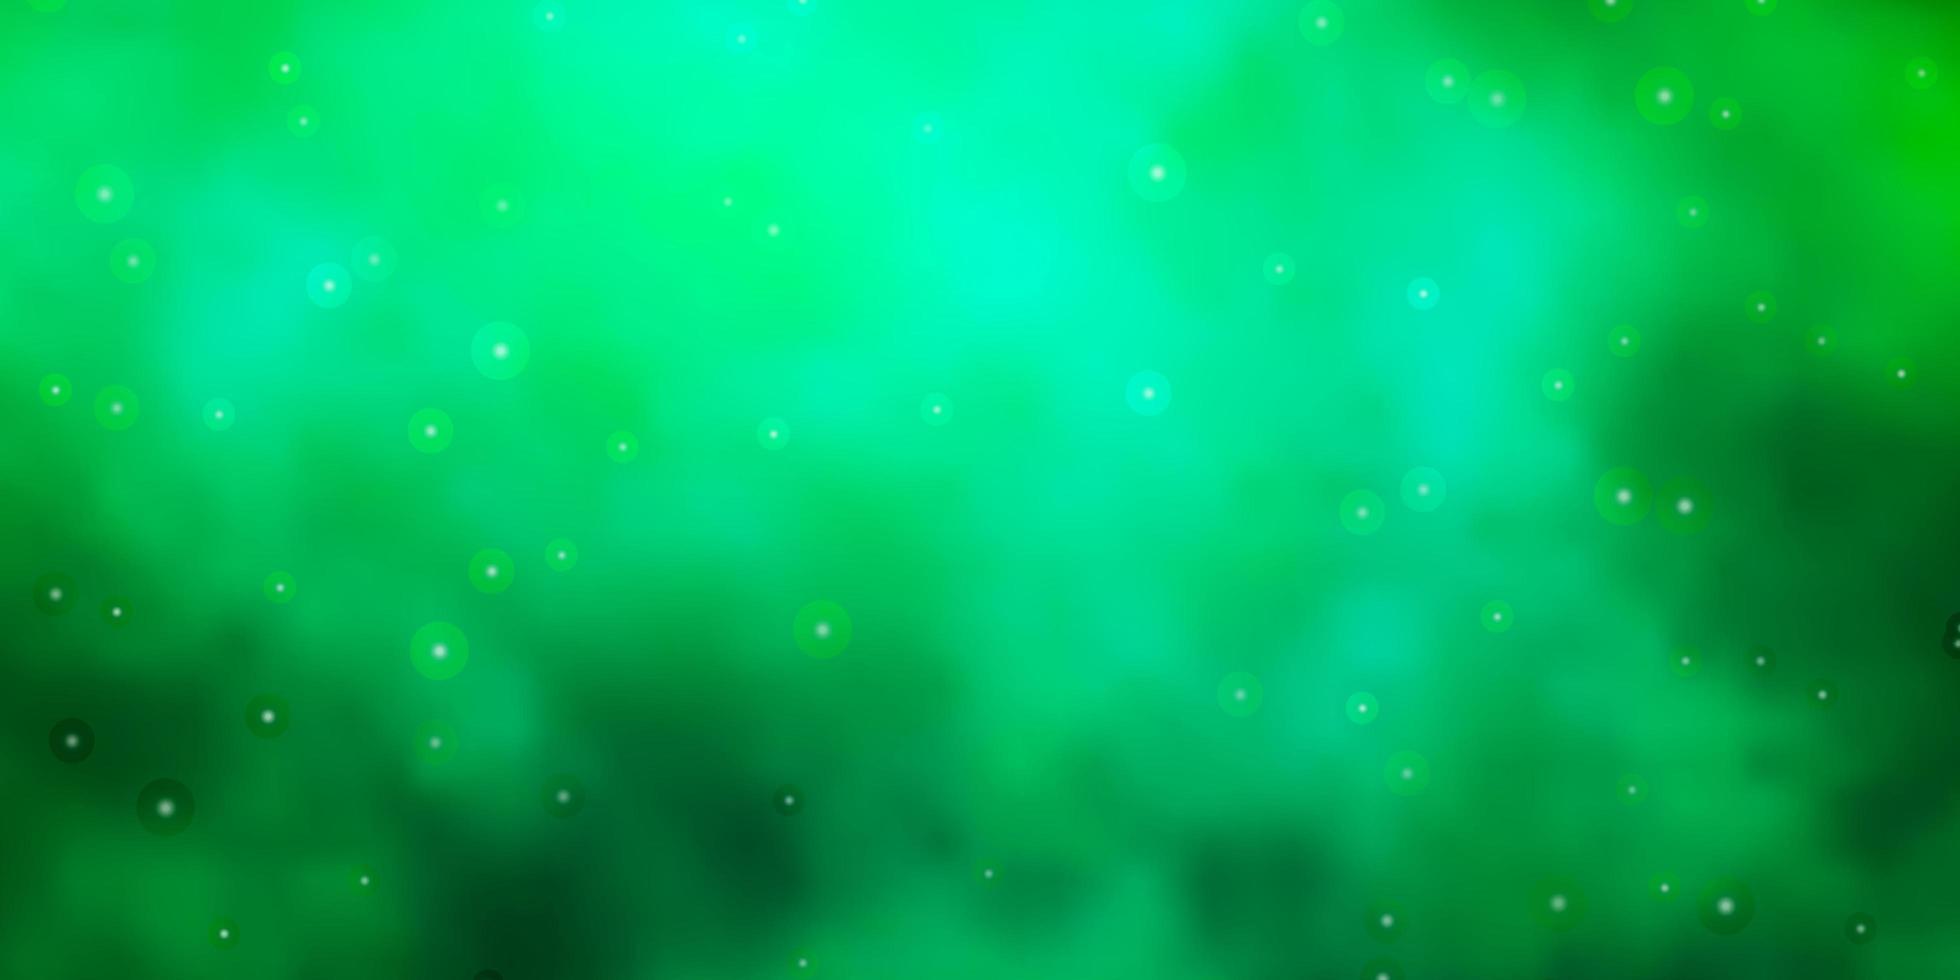 Light Green vector background with colorful stars Colorful illustration in abstract style with gradient stars Theme for cell phones